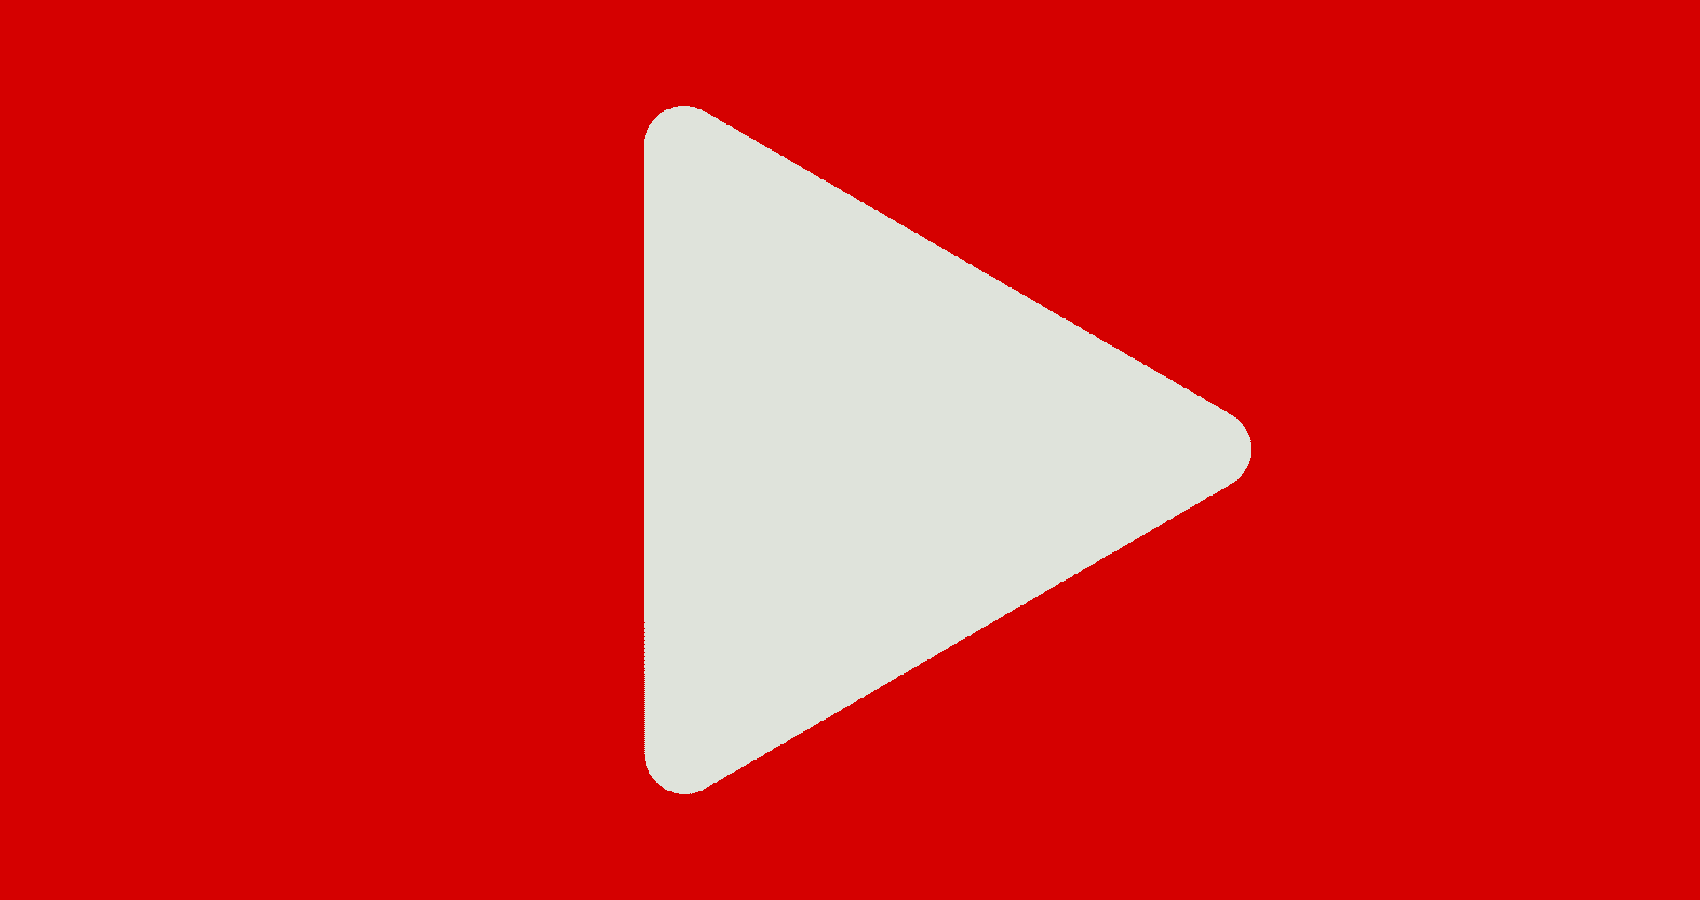 A white play button on a red background representing YouTube.